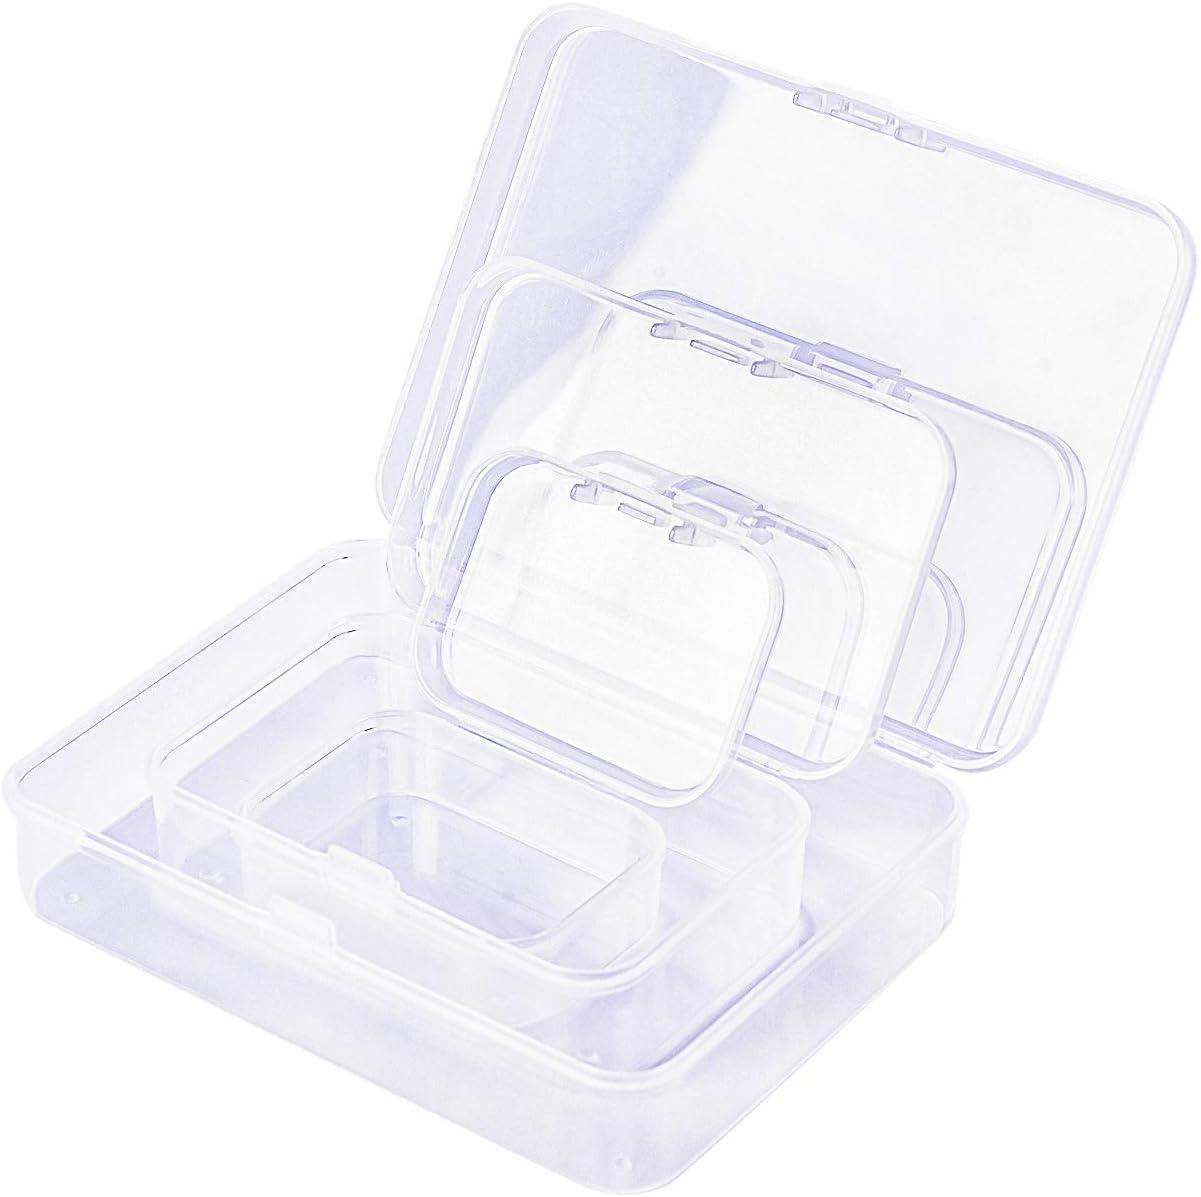 LJY 28 Pieces Mixed Sizes Rectangular Empty Mini Plastic Storage Containers  with Lids for Small Items and Other Craft Projects (Clear)